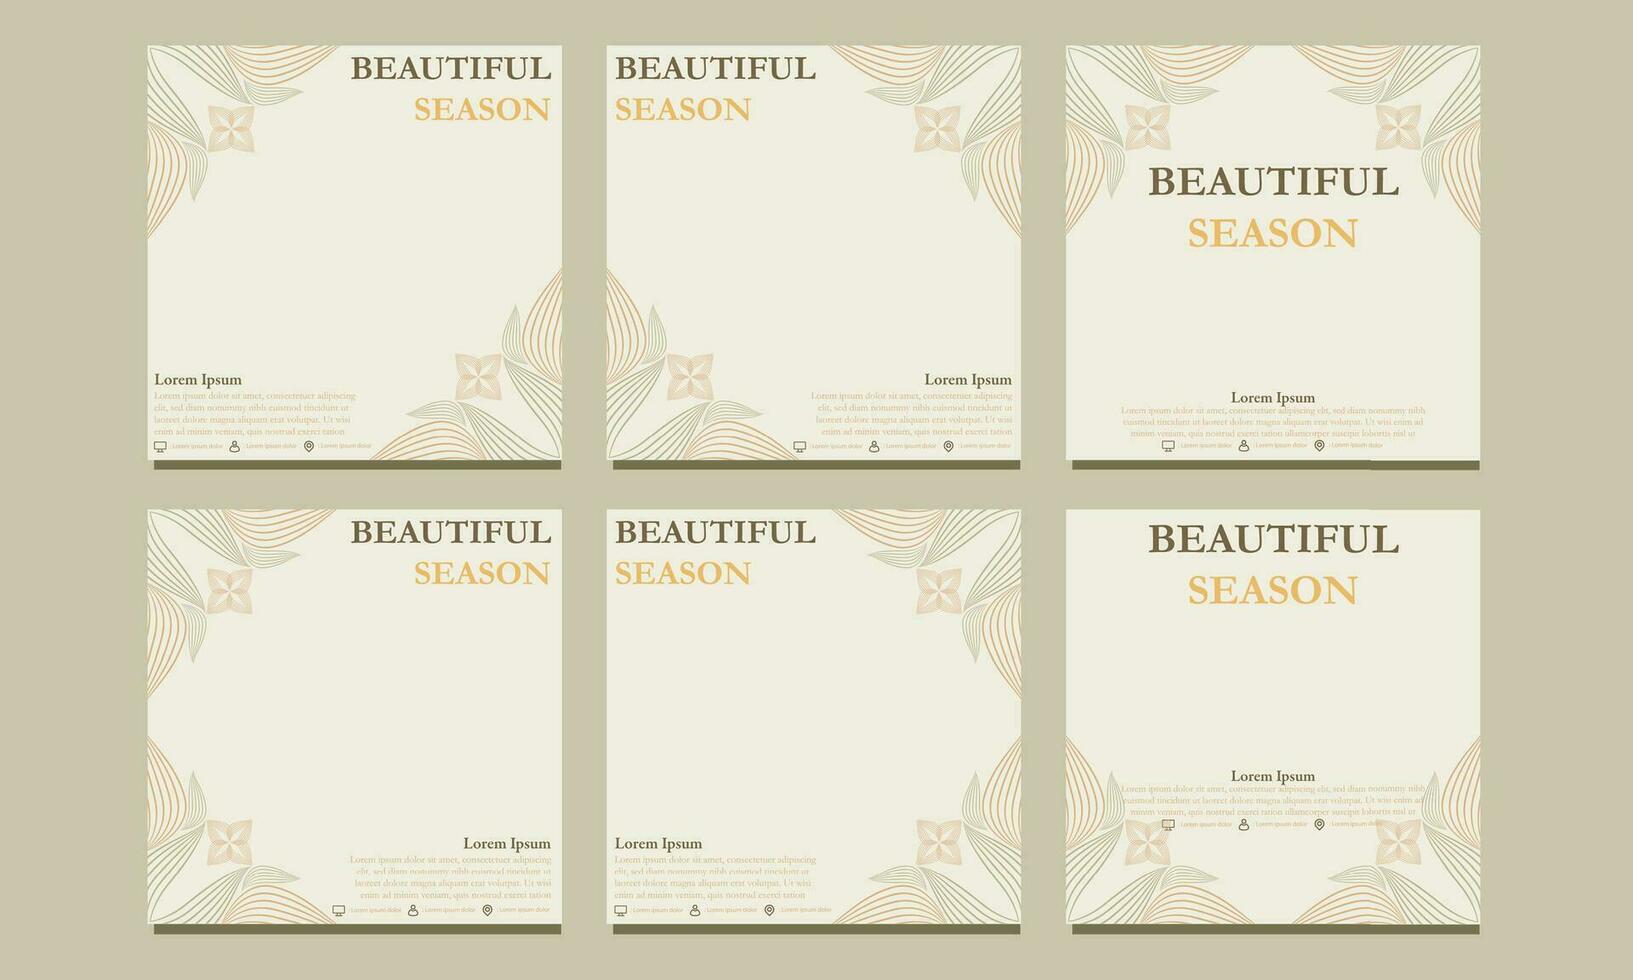 beautiful floral social media template. suitable for social media post, web banner, cover and card vector